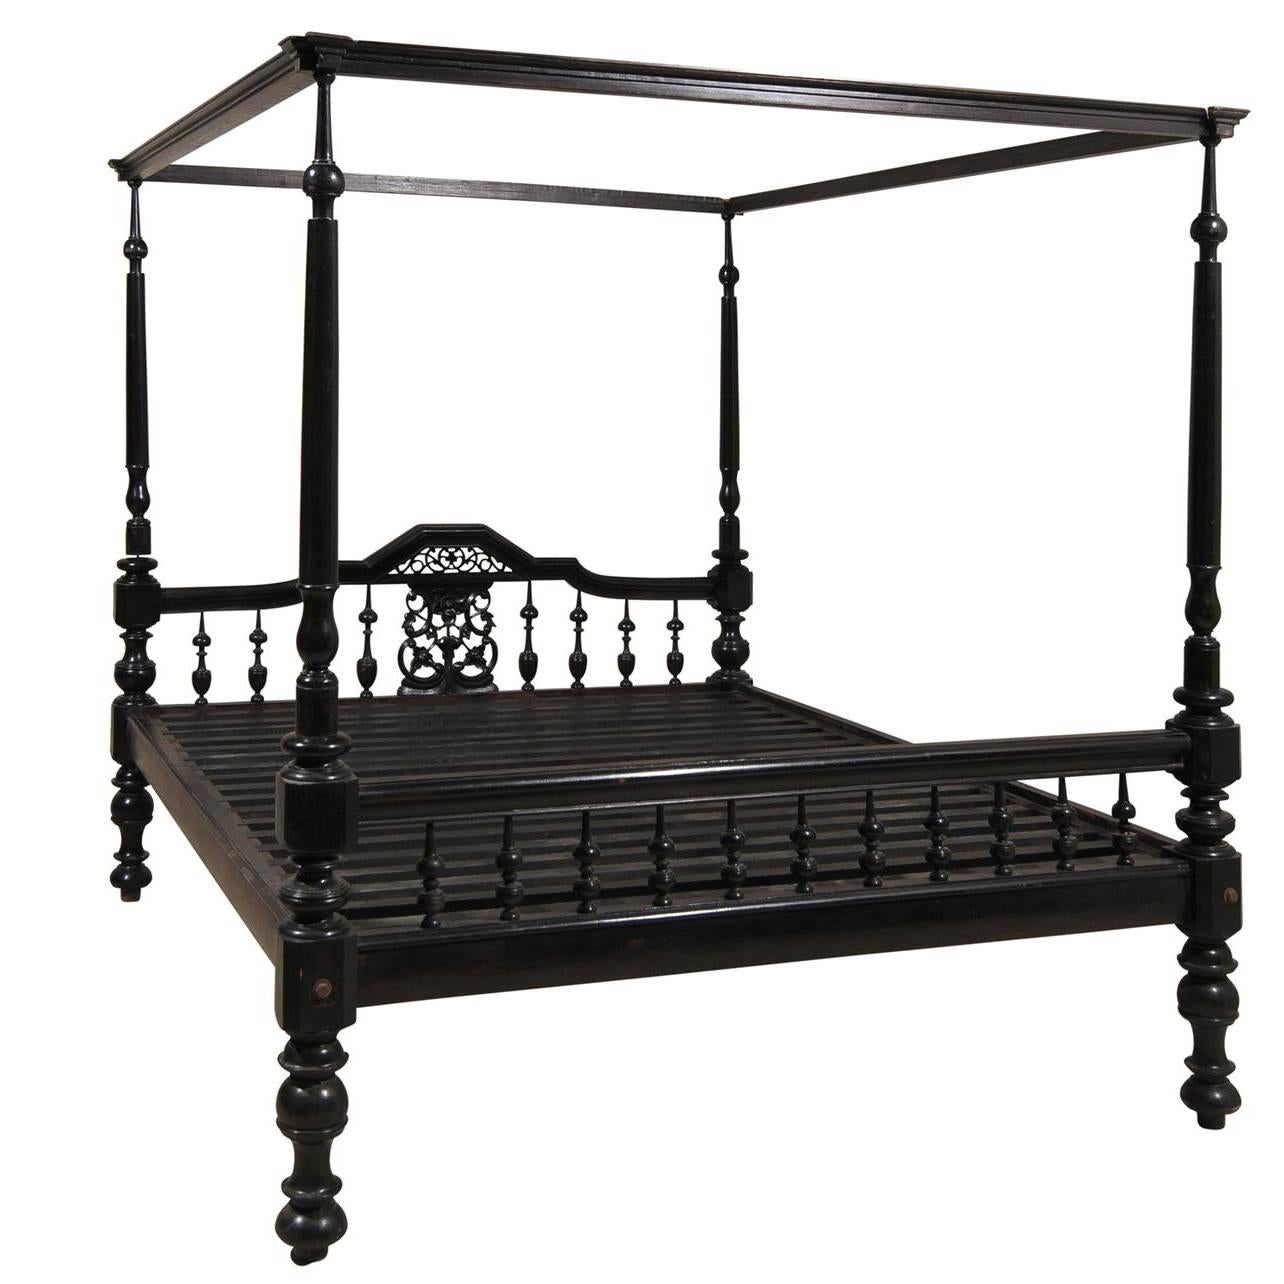 Antique Black Four Post Canopy Style Bed